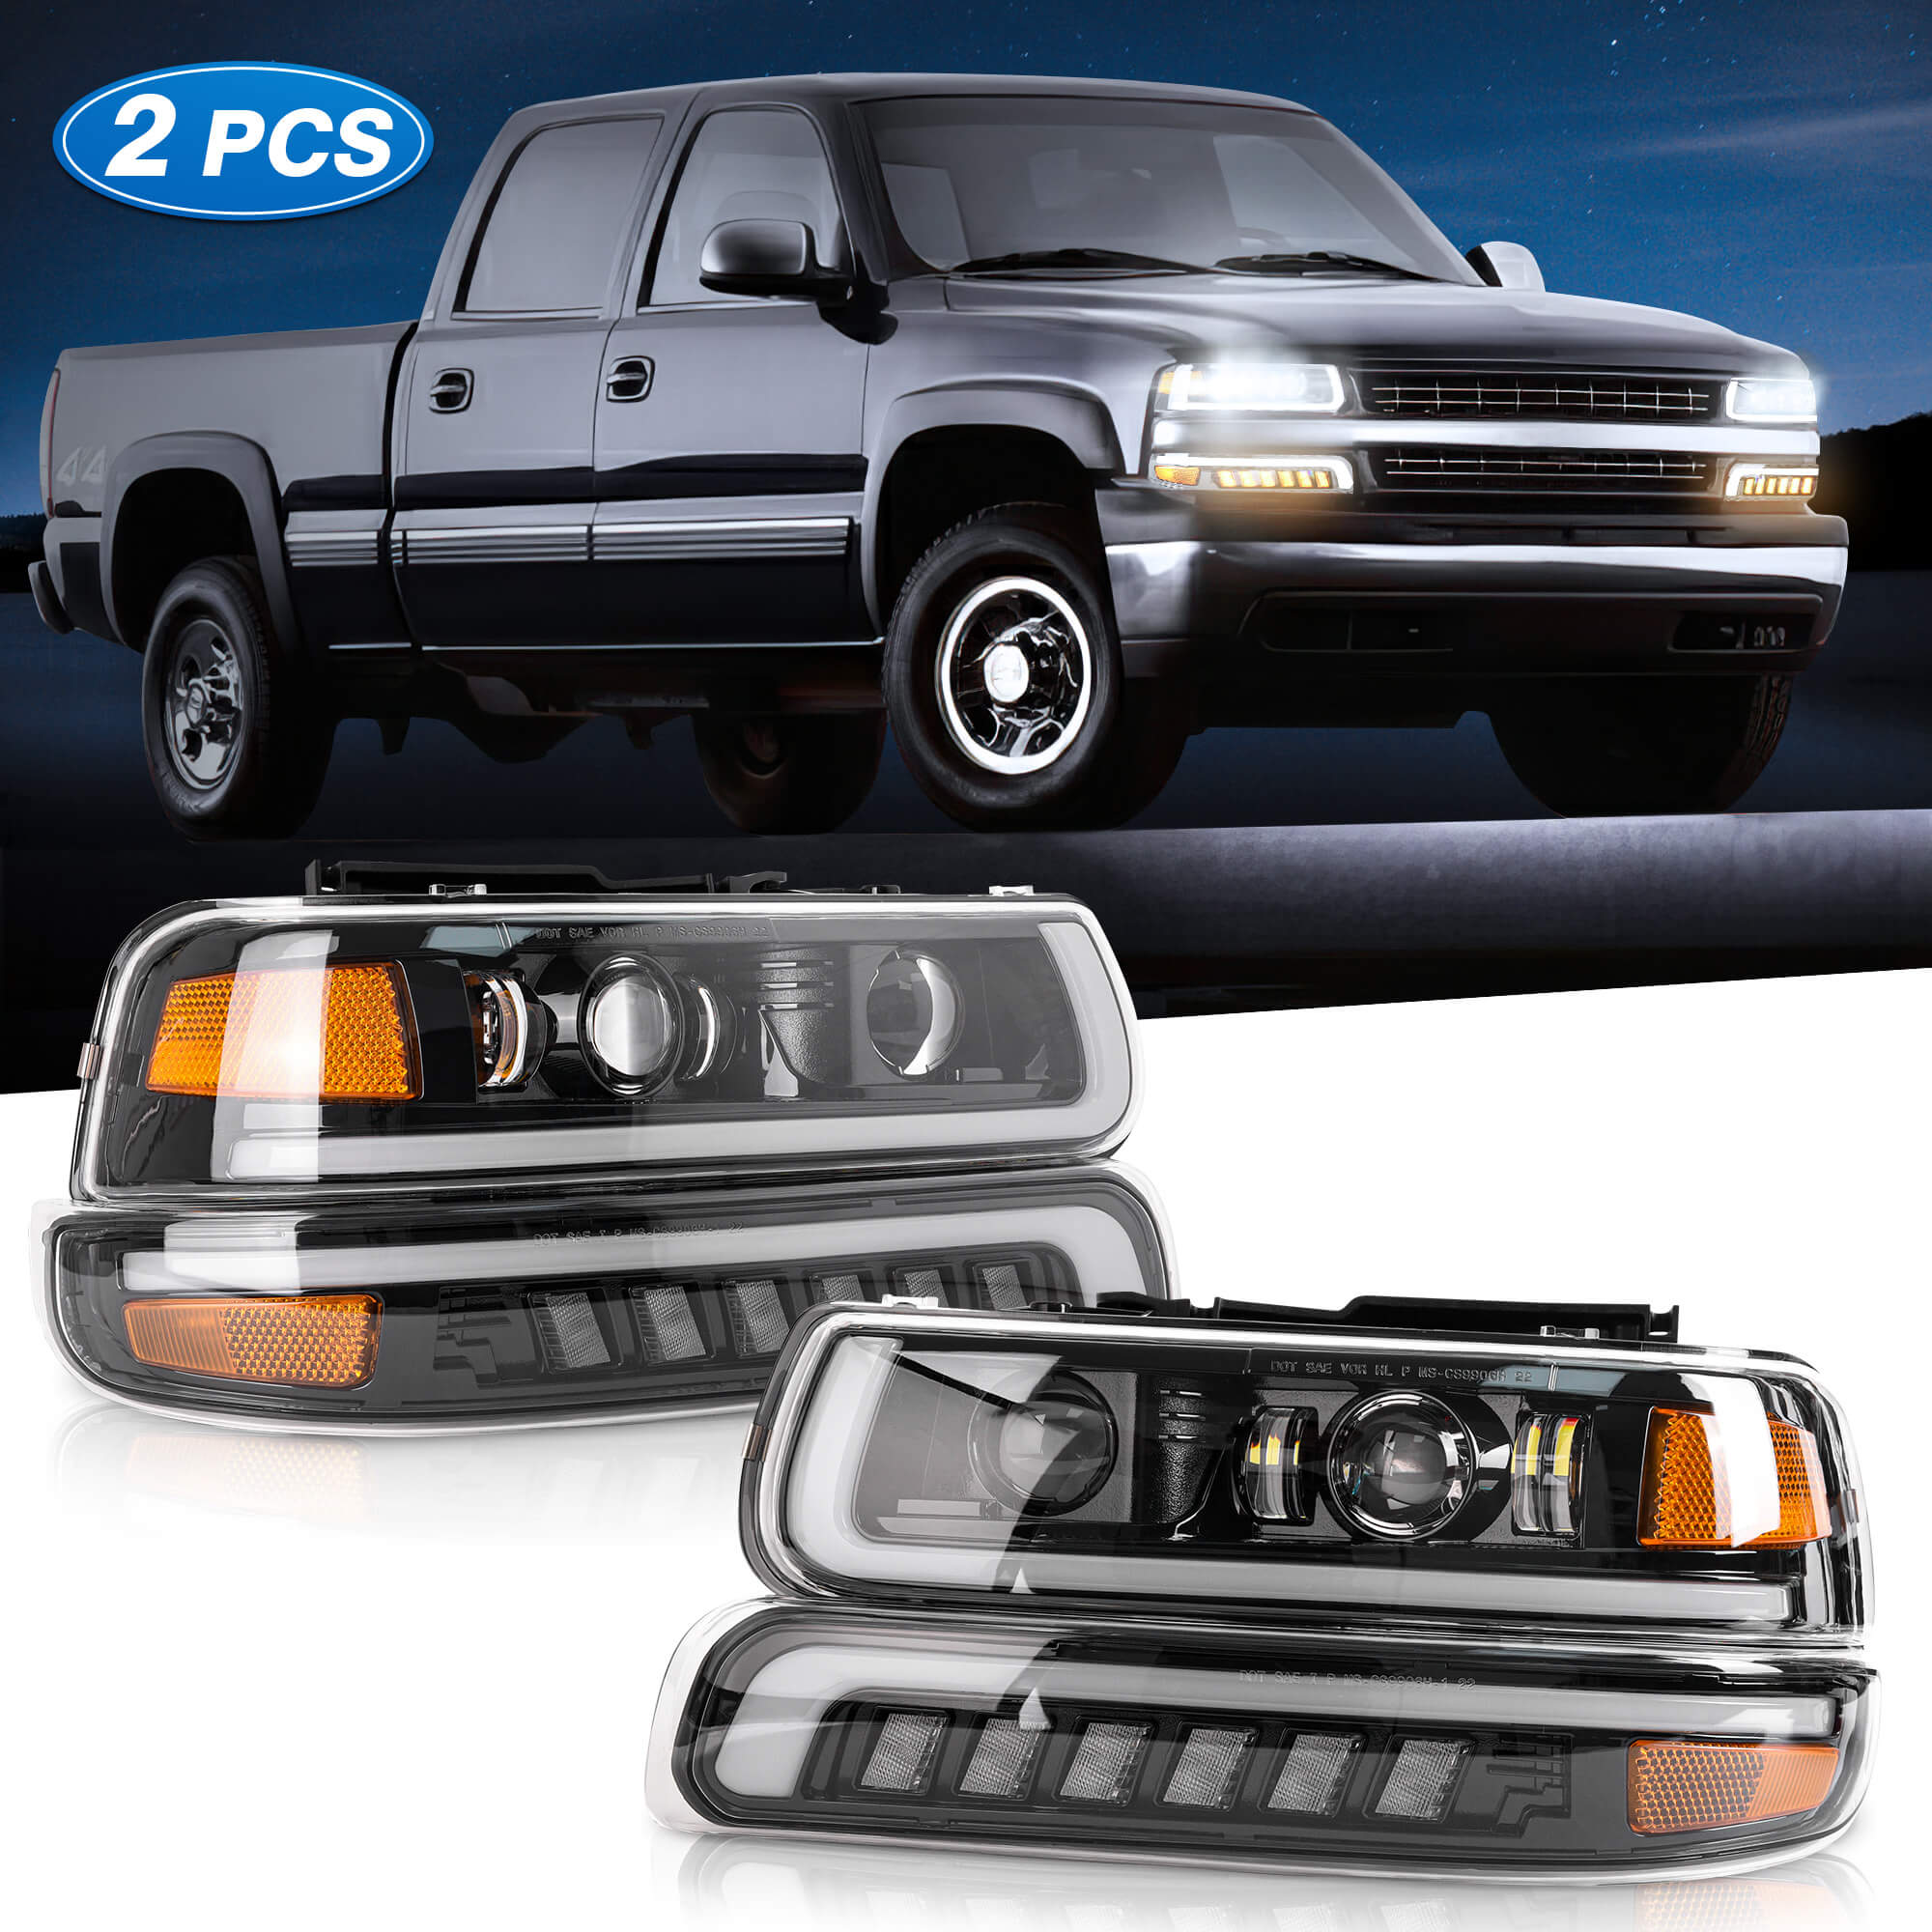 2pc Chrome Headlights Assembly Turn Signal Lamps for Chevy Chevrolet Silverado 1500/2500 (99-02 ) 1500HD/2500 HD/3500 (01-02), Suburban 1500/2500/Tahoe (00-06)